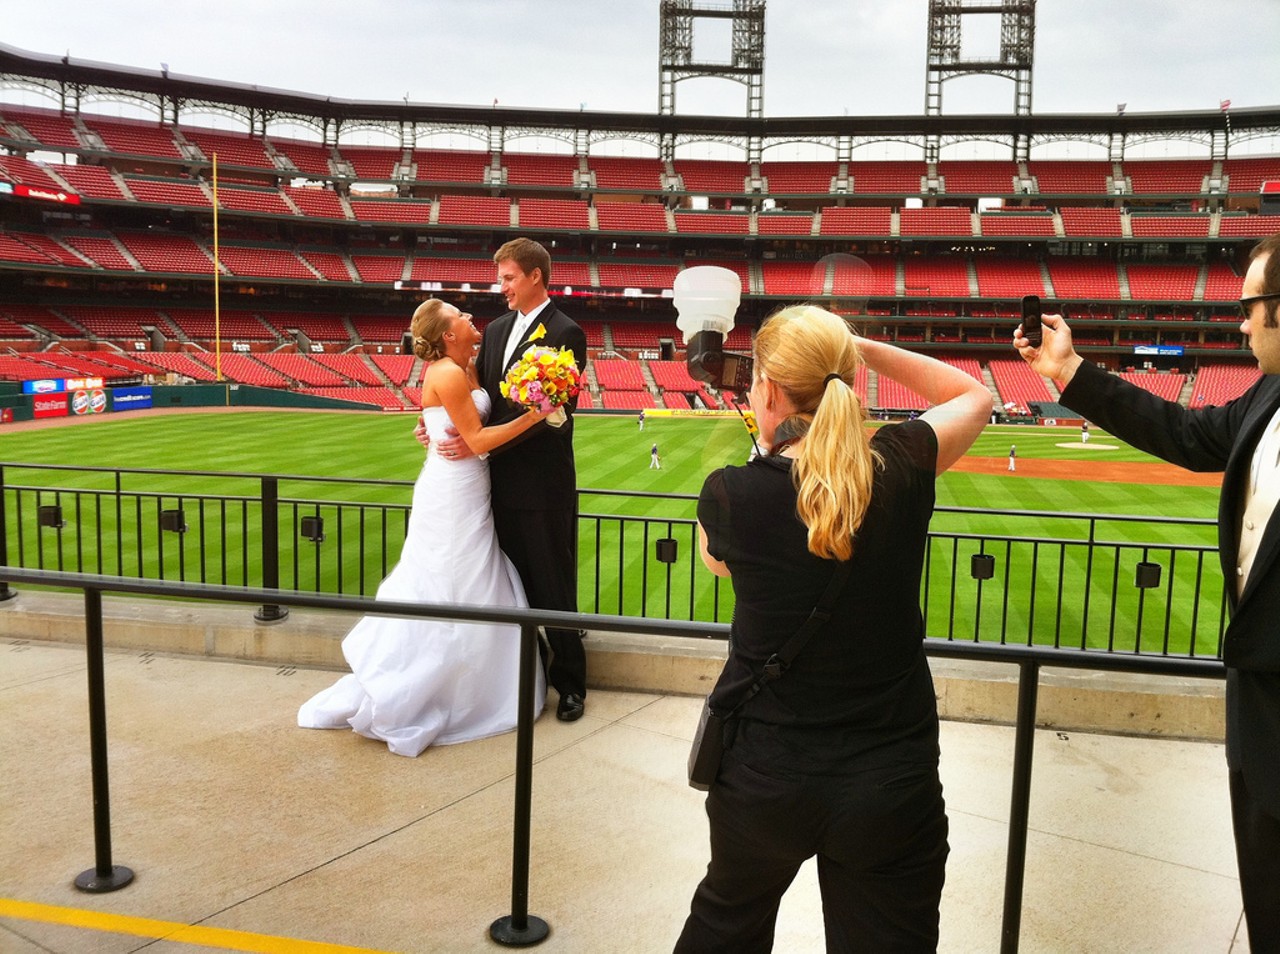 Busch Stadium
The home of the Cardinals is obviously a great place to get a beer and watch a great game, but Busch Stadium is also a great place to get hitched. With a number of packages offered, saying &#147;I do&#148; in the coveted home of baseball&#146;s best team is more of a reality than you would think. For information about planning your special day at Busch Stadium, click here. Photo via Flickr / Kode_name